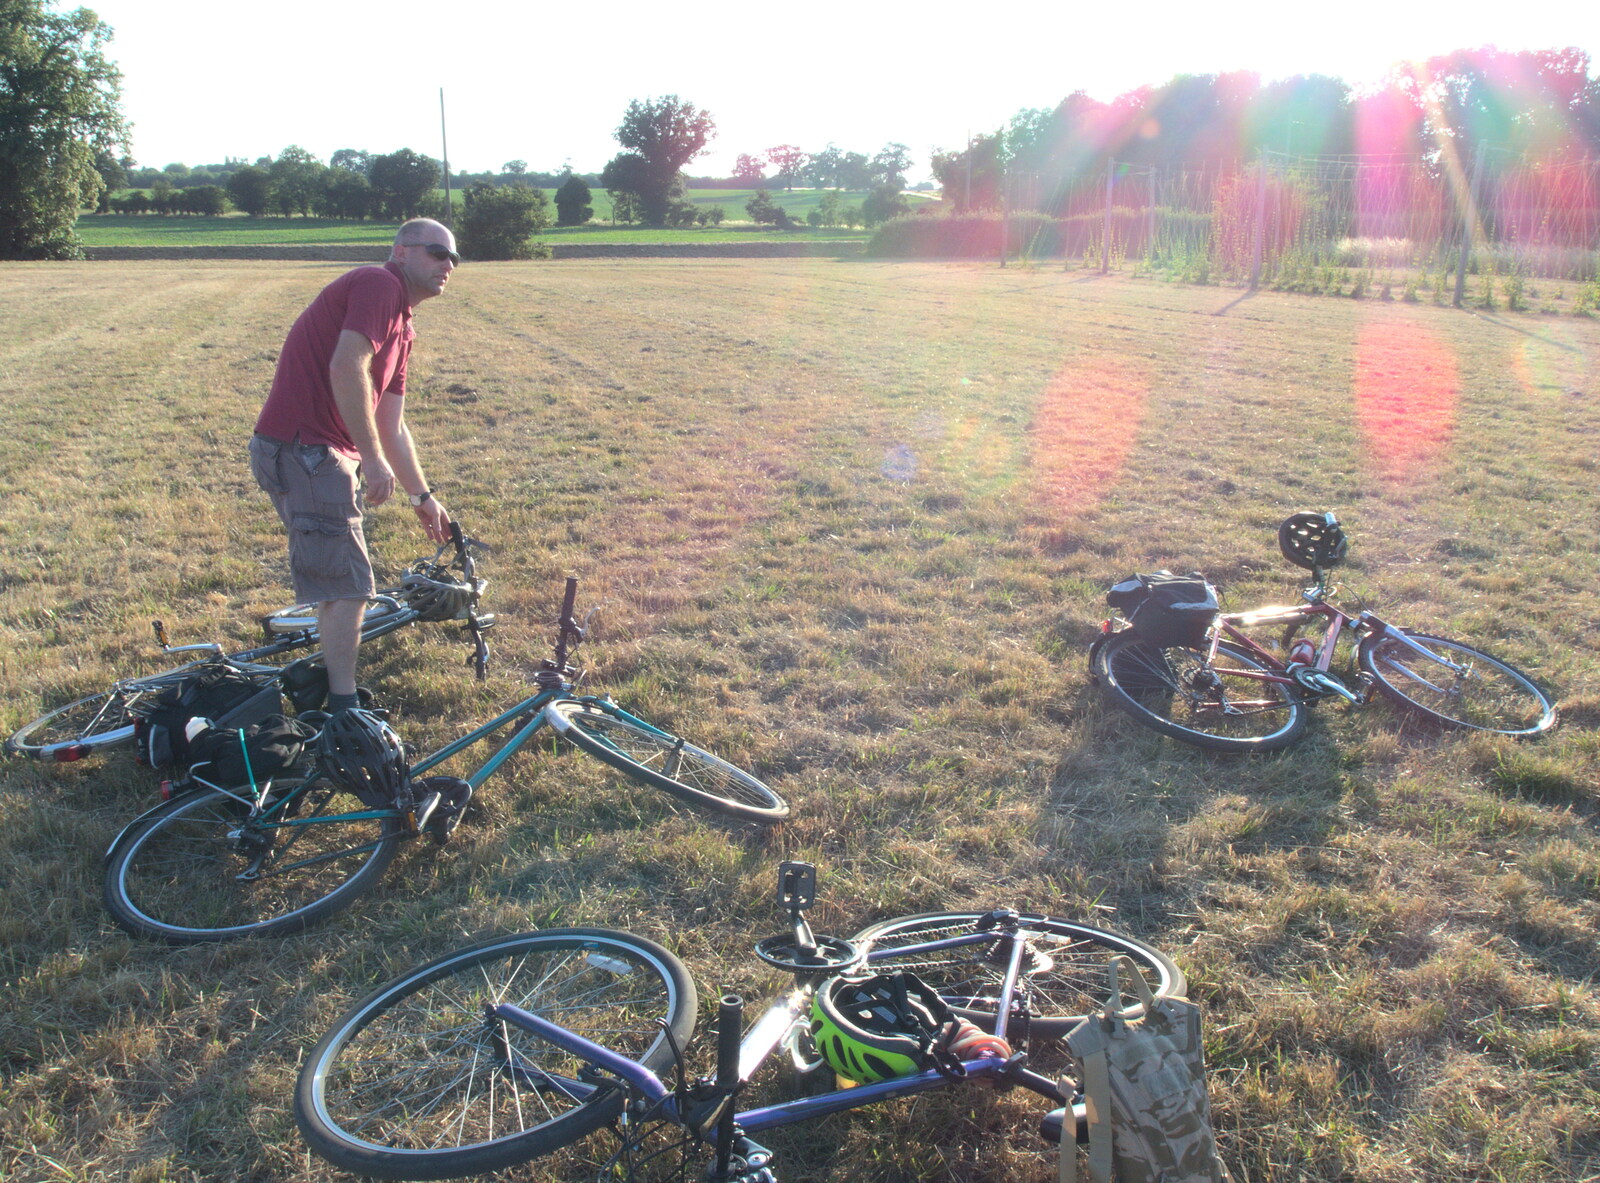 The BSCC Rides to Star Wing Beer Festival, Redgrave, Suffolk - 12th July 2018: Paul drops his bike on the grass